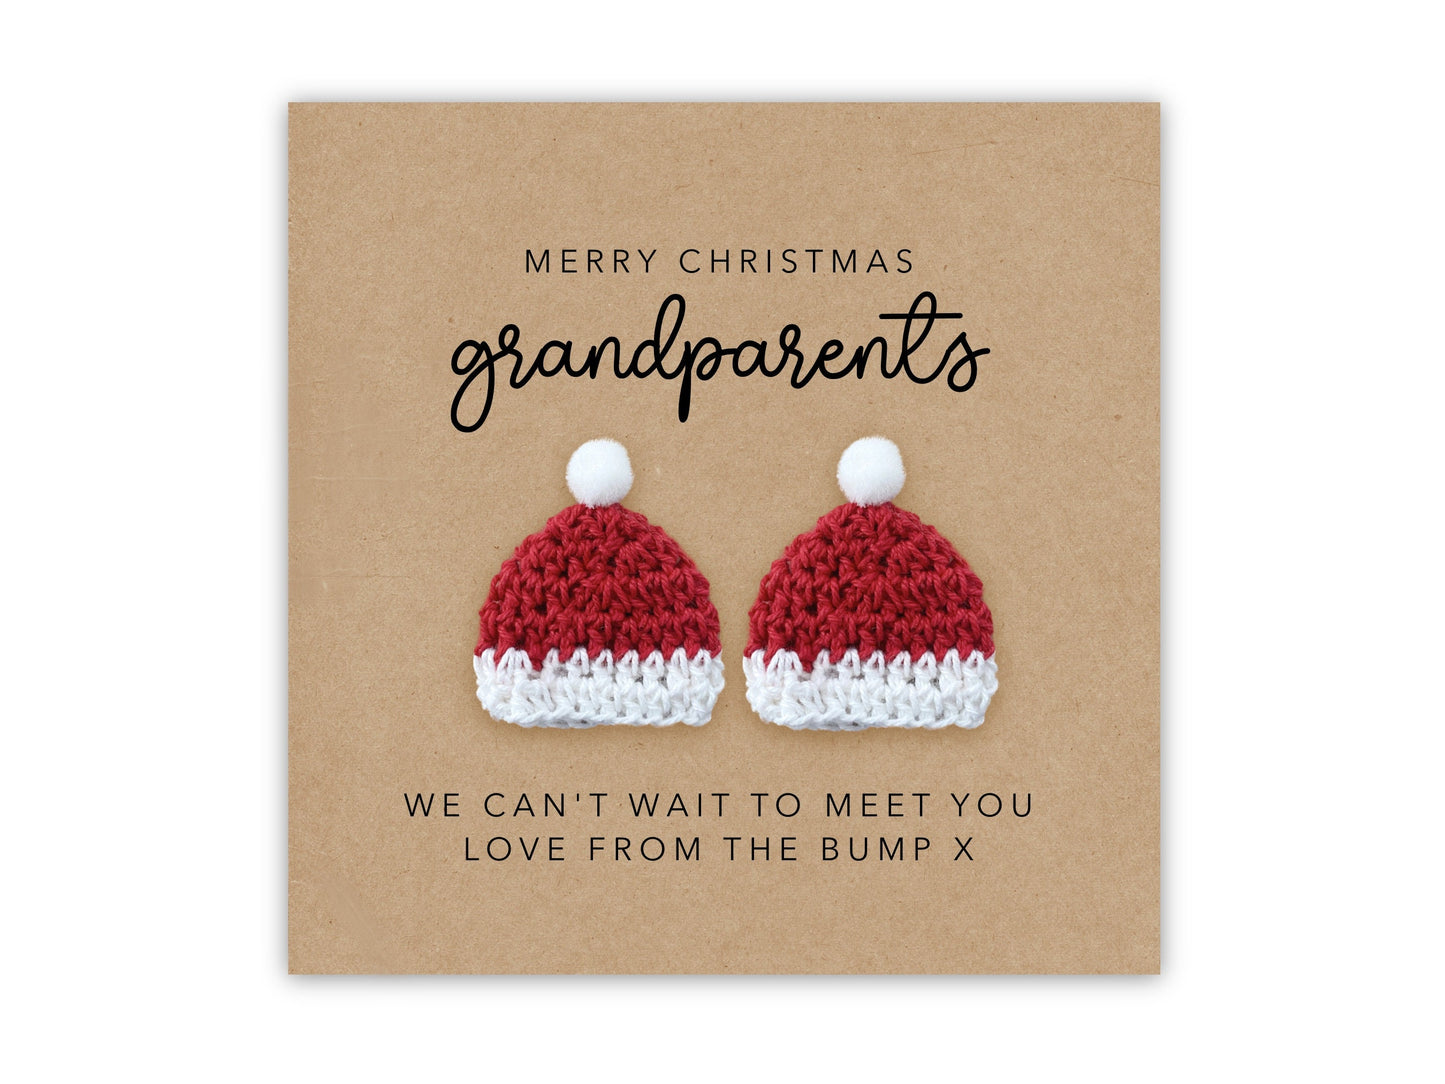 Merry Christmas Grandparents From Twin Bump, Cute Christmas Card For Grandparents, Daddy To be Christmas Card, Cute Christmas Card From Bump